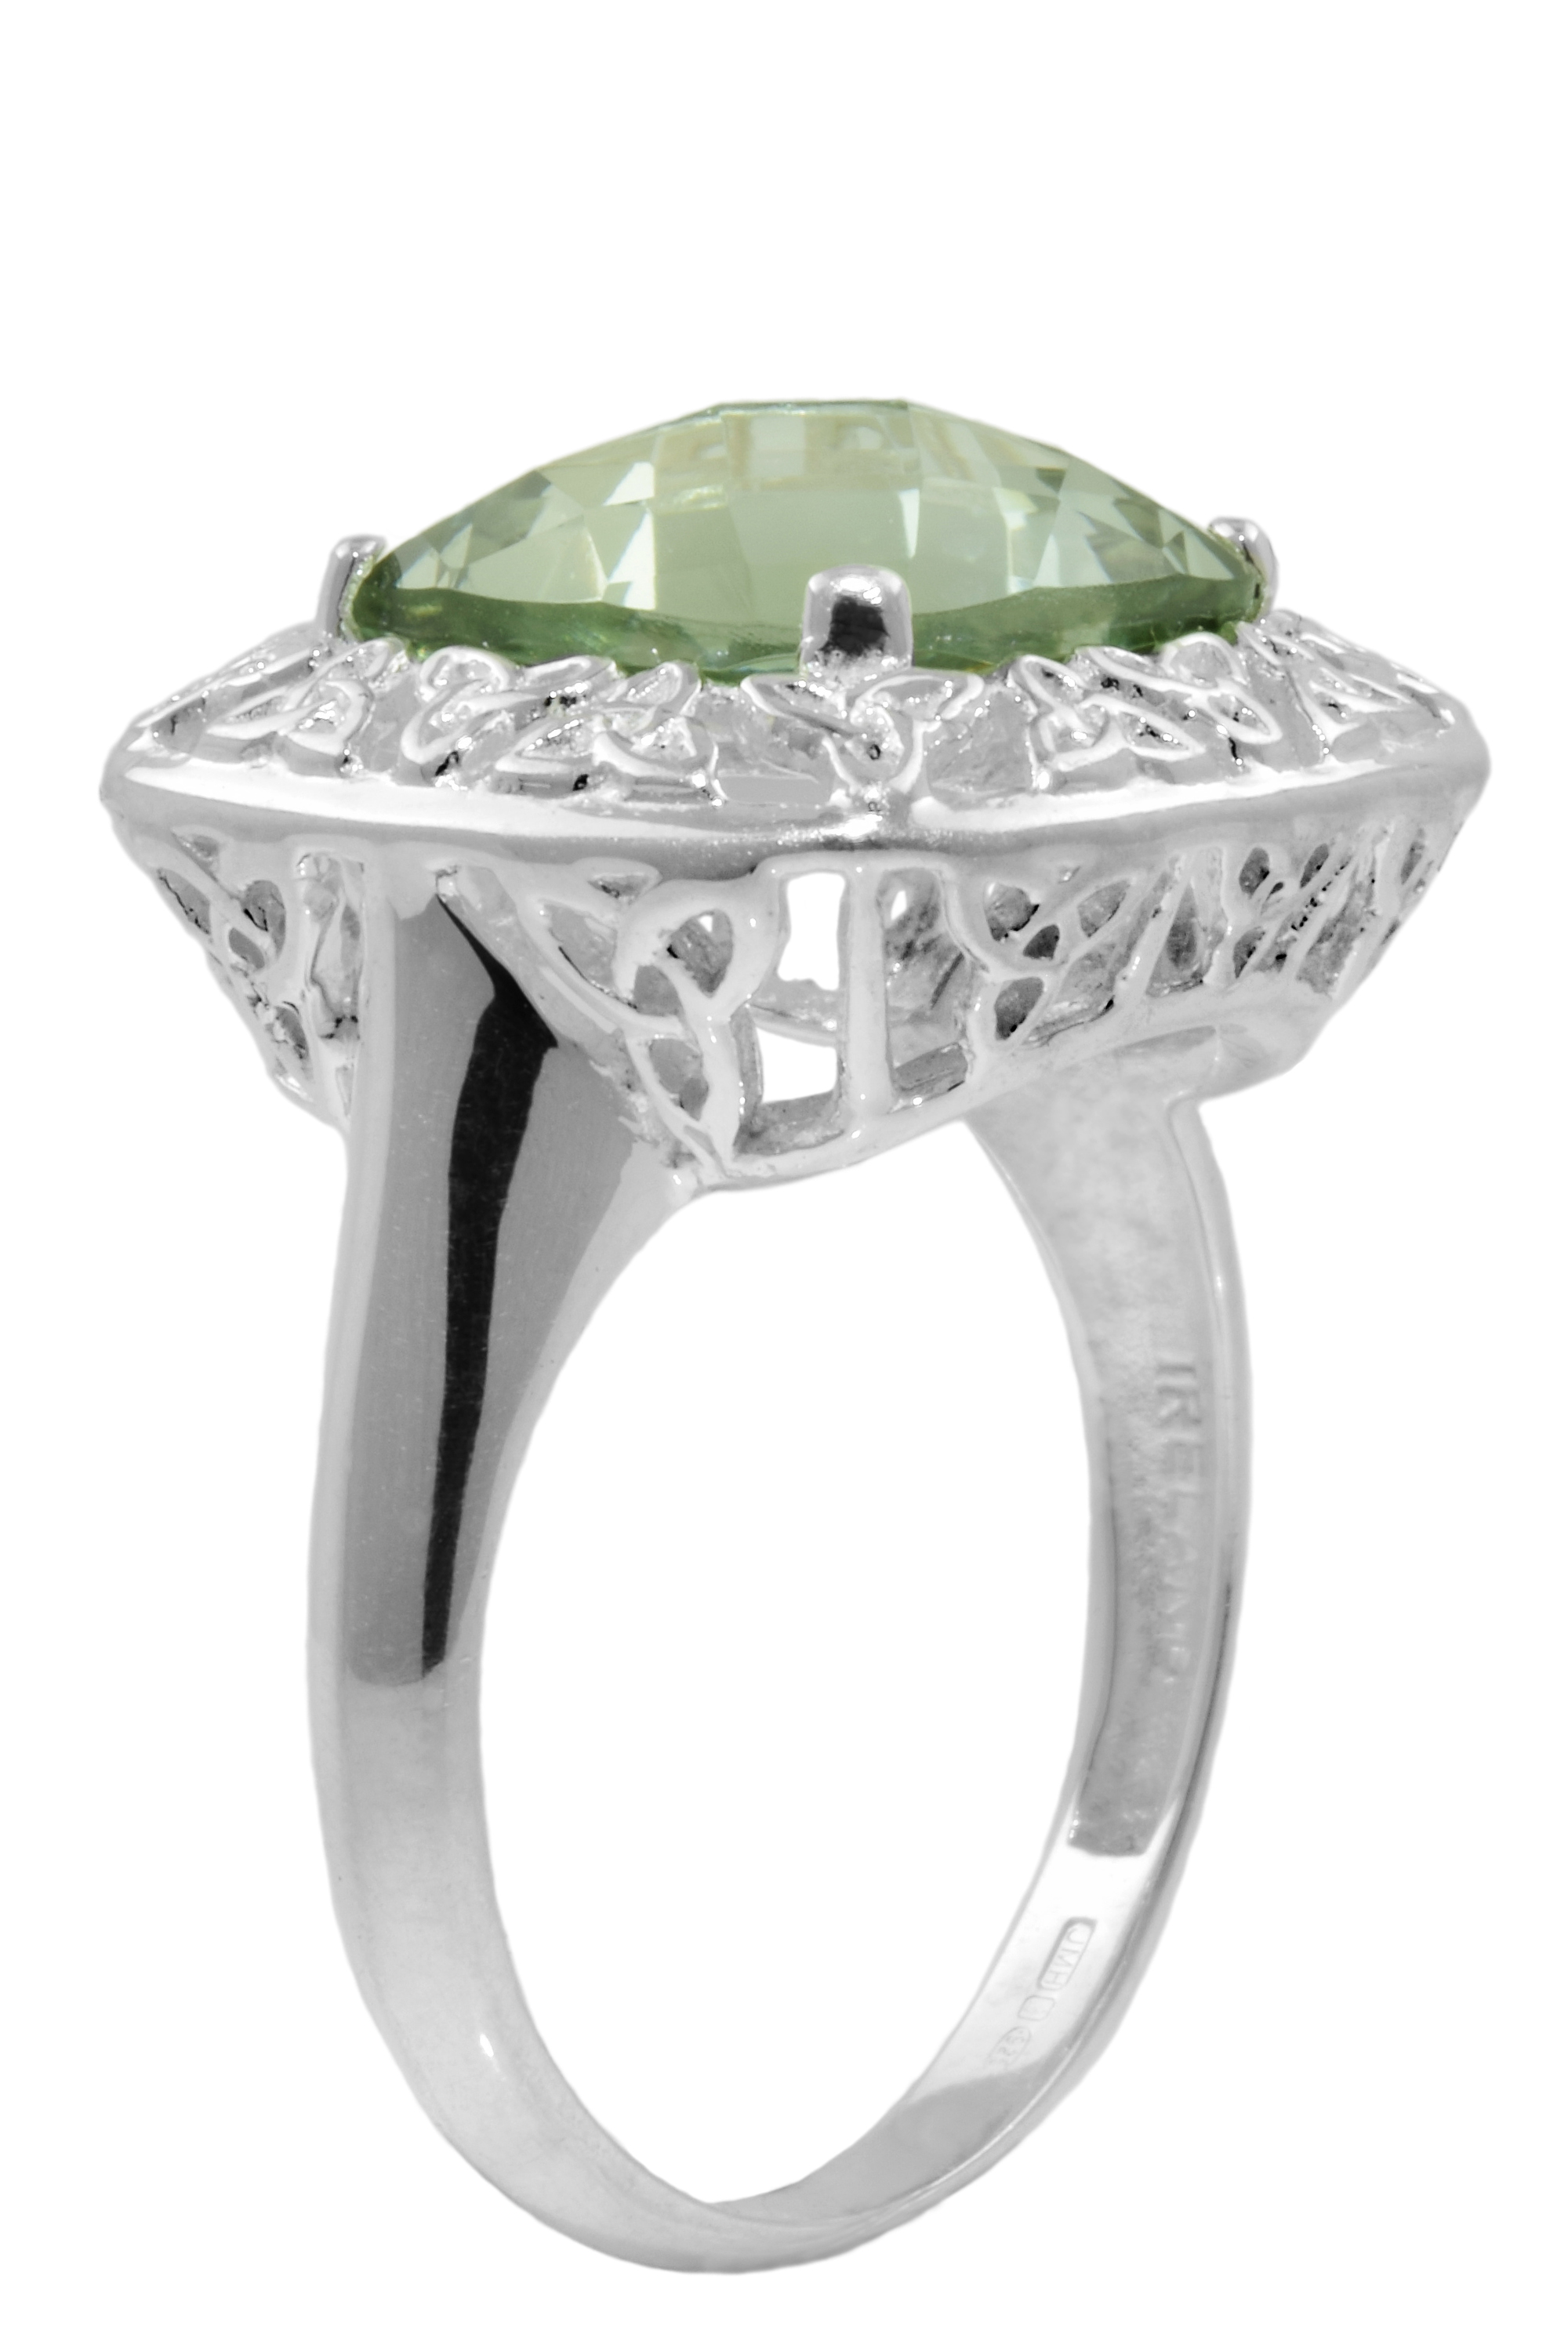 Product image for Trinity Knot Ring - Green Amethyst Filigree Trinity Knot Ring